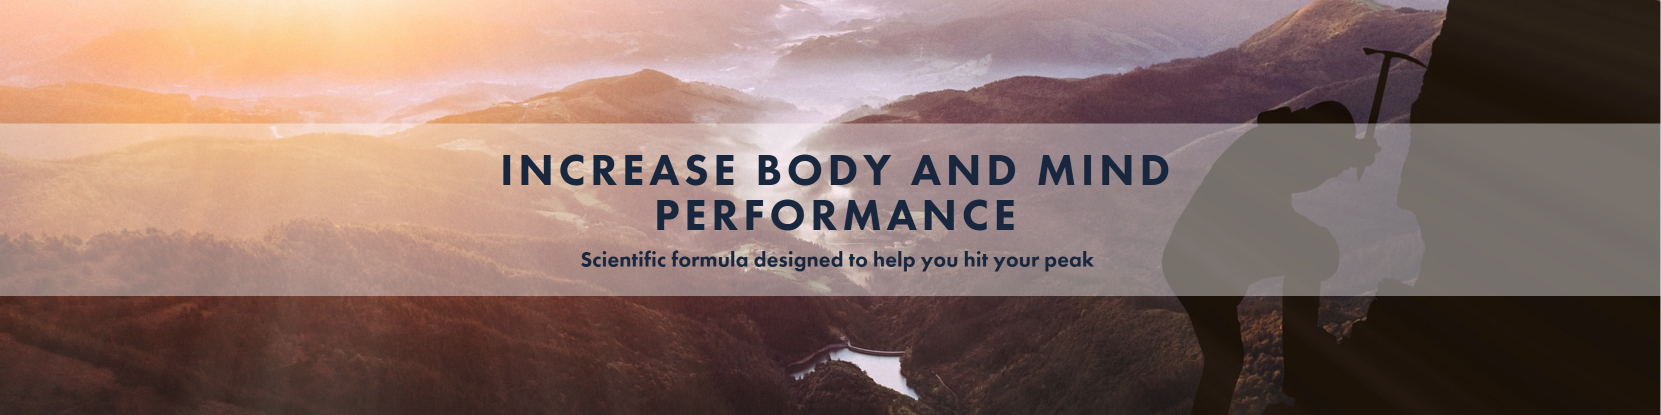 Synapse Supplements Body and Mind Performance - scientific formula to help you hit your peak